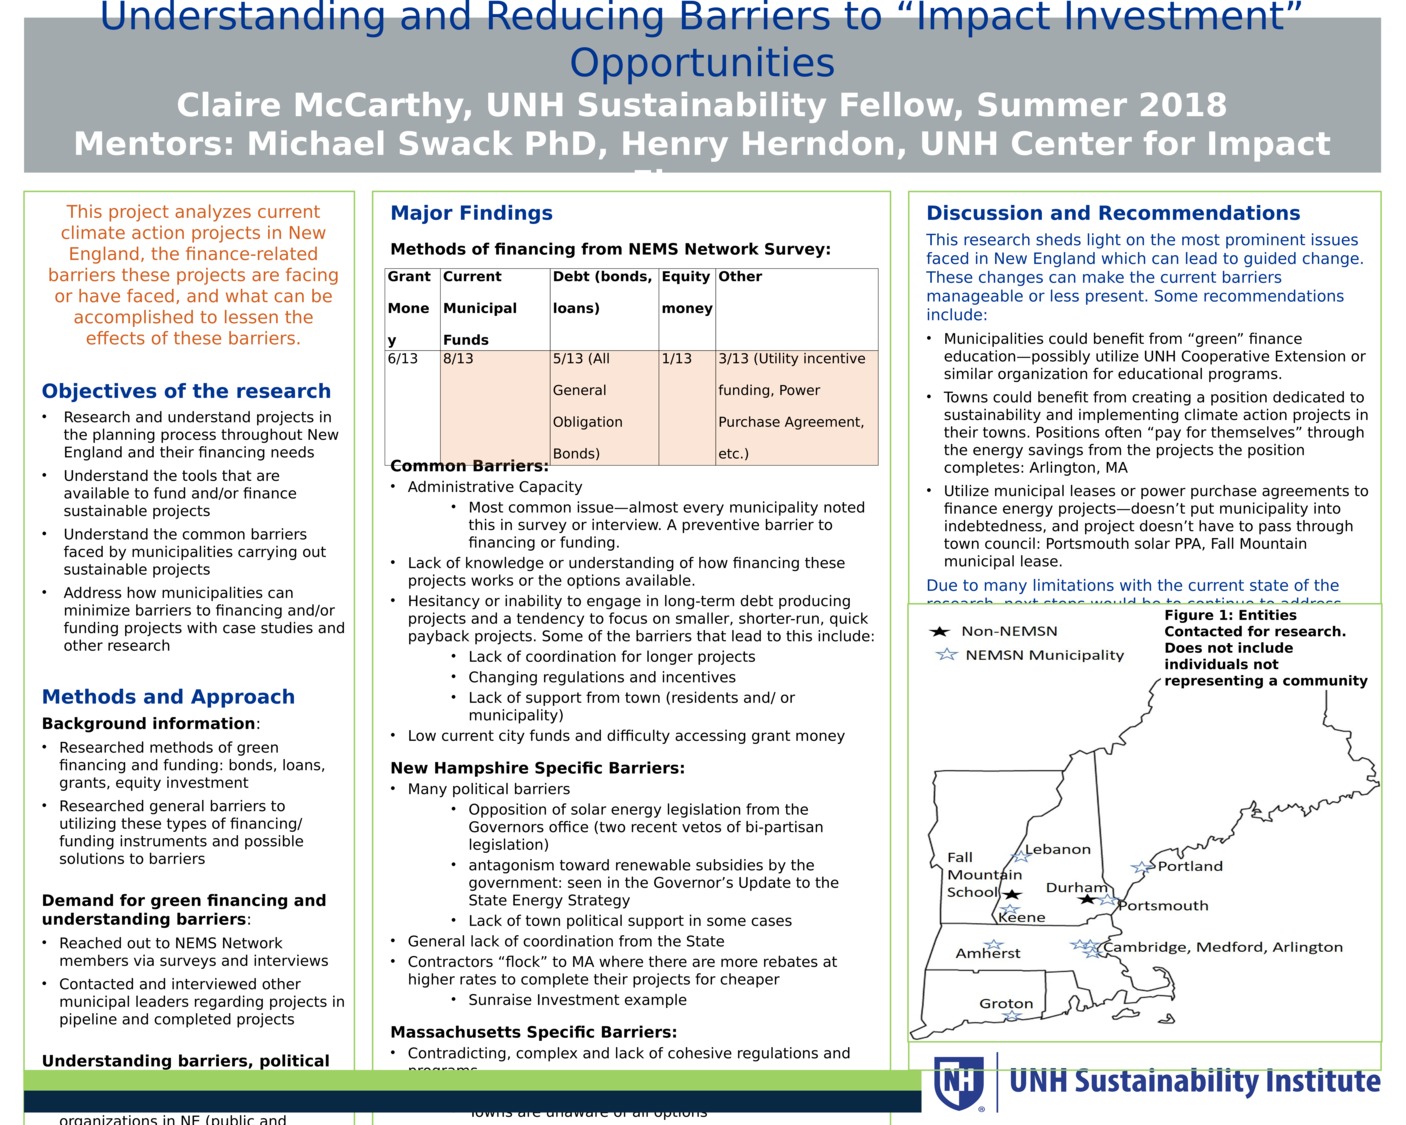 Understanding And Reducing Barriers To “Impact Investment” Opportunities by Cm18